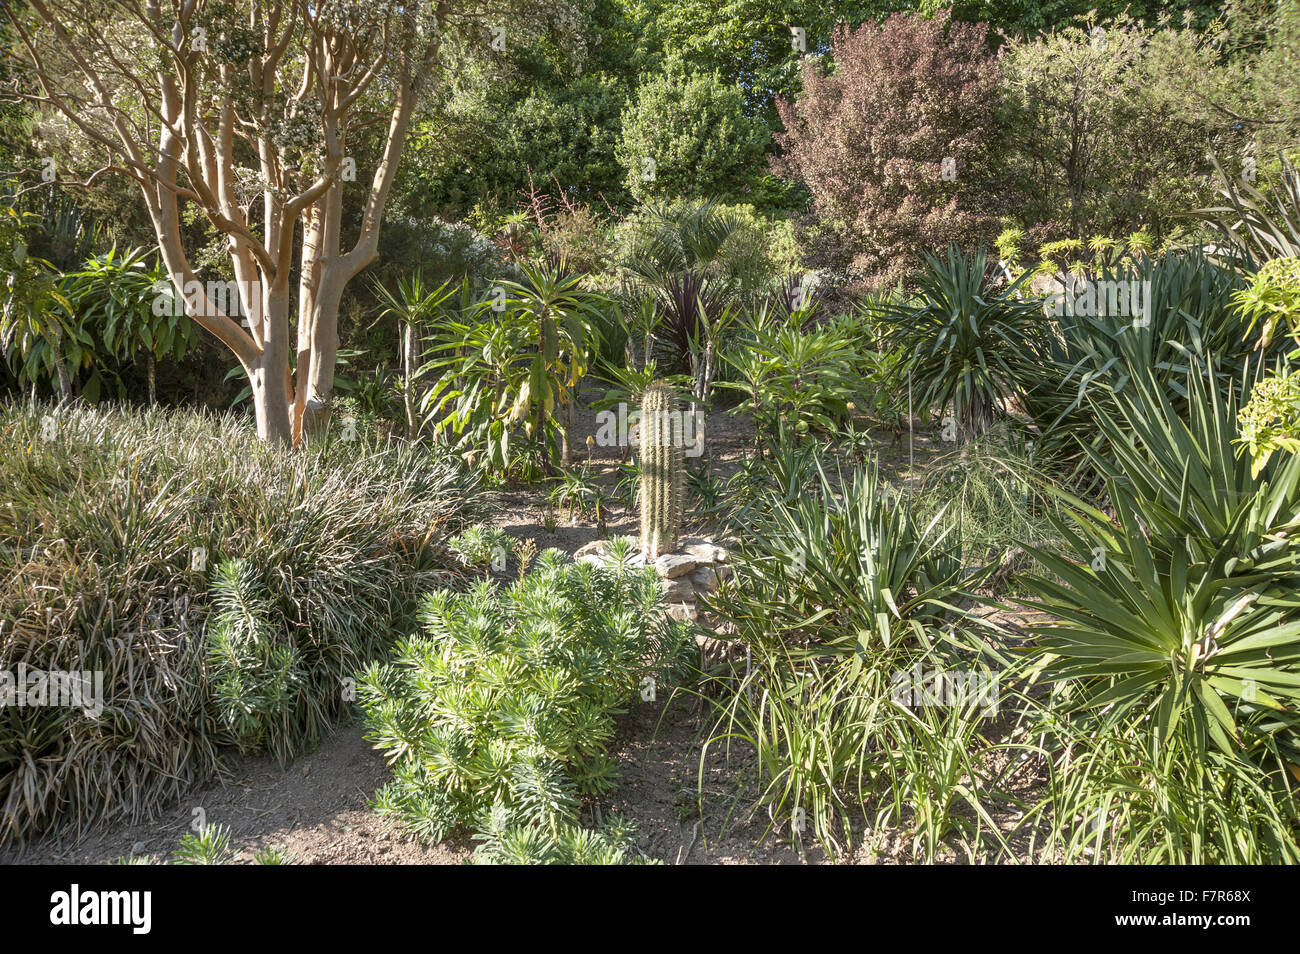 The garden at at Coleton Fishacre, Devon. Plants include yuccas, bromeliads, echiums, euphorbias, fascicularias and cacti, with trees including the Chilean myrtle, Luma apiculata. Stock Photo